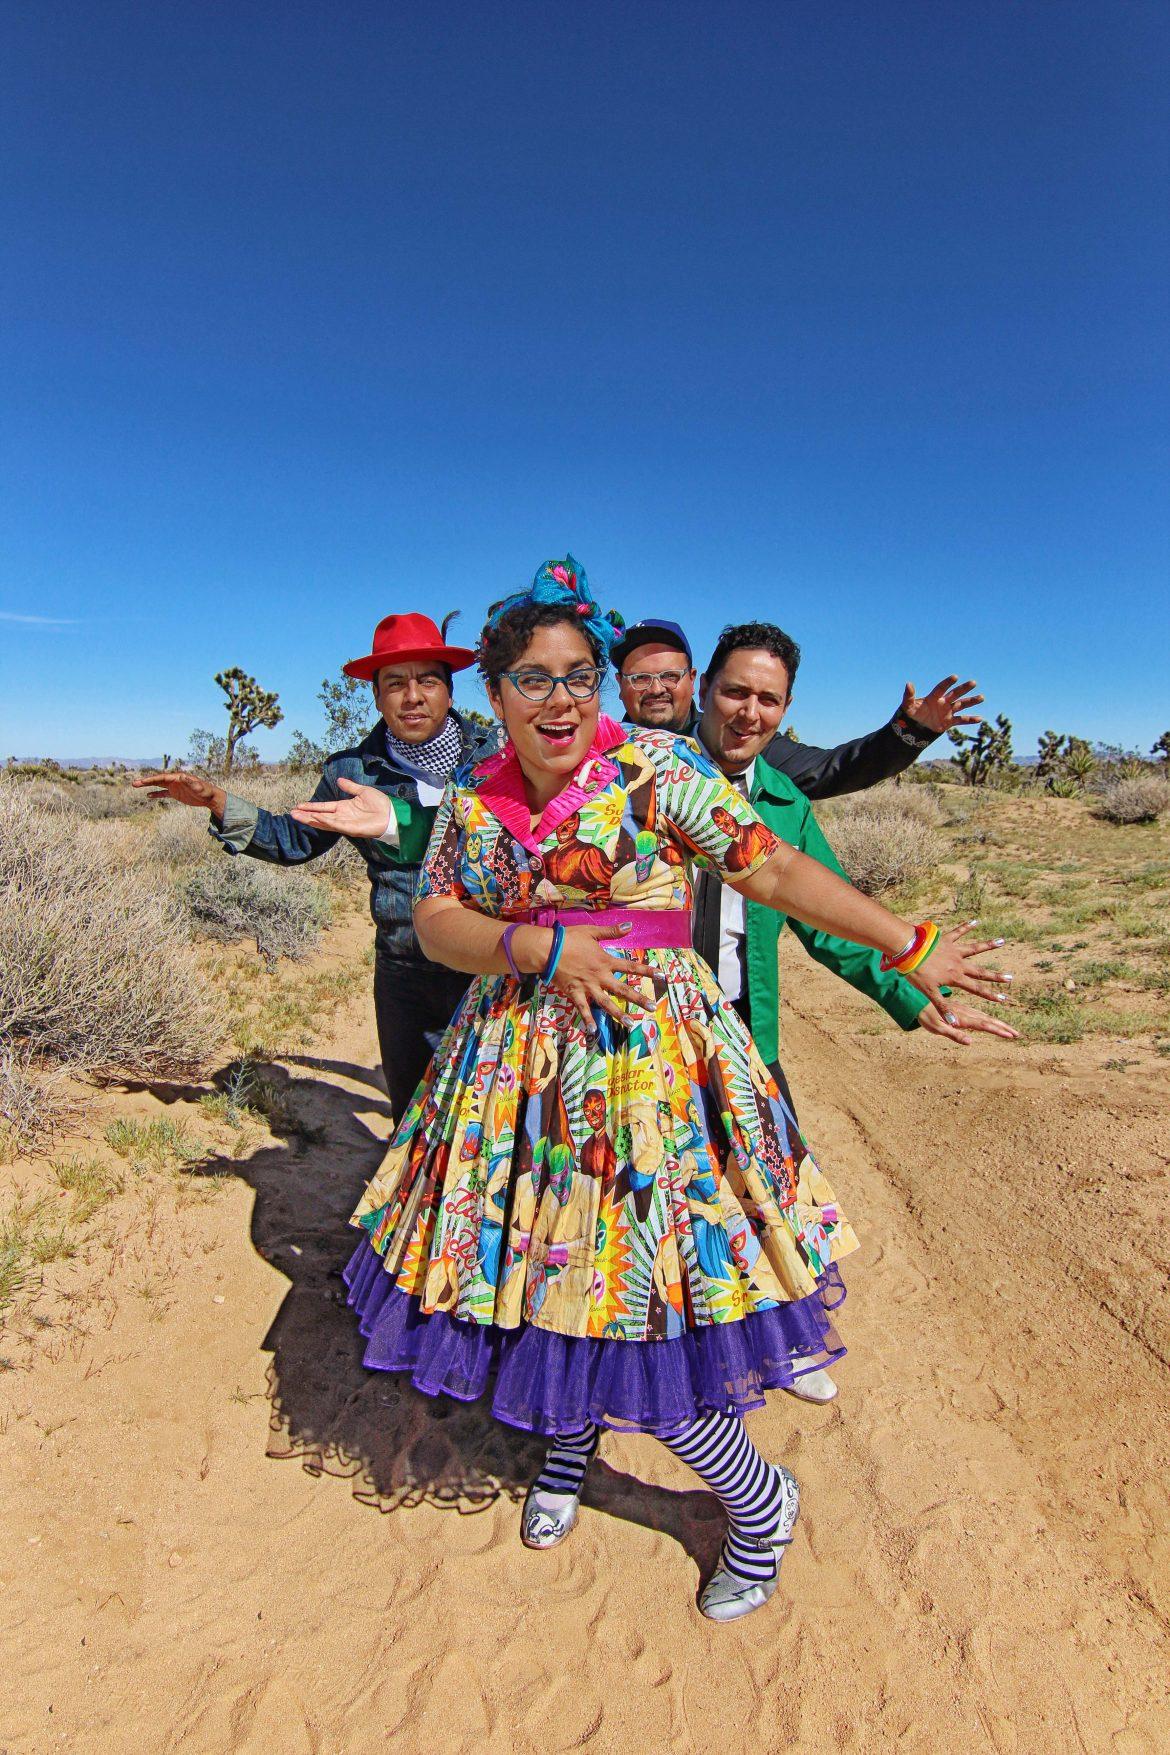 LSC band members display their folkloric clothing in a photo shoot at the Joshua Tree National Park. (Courtesy of the VPAC)